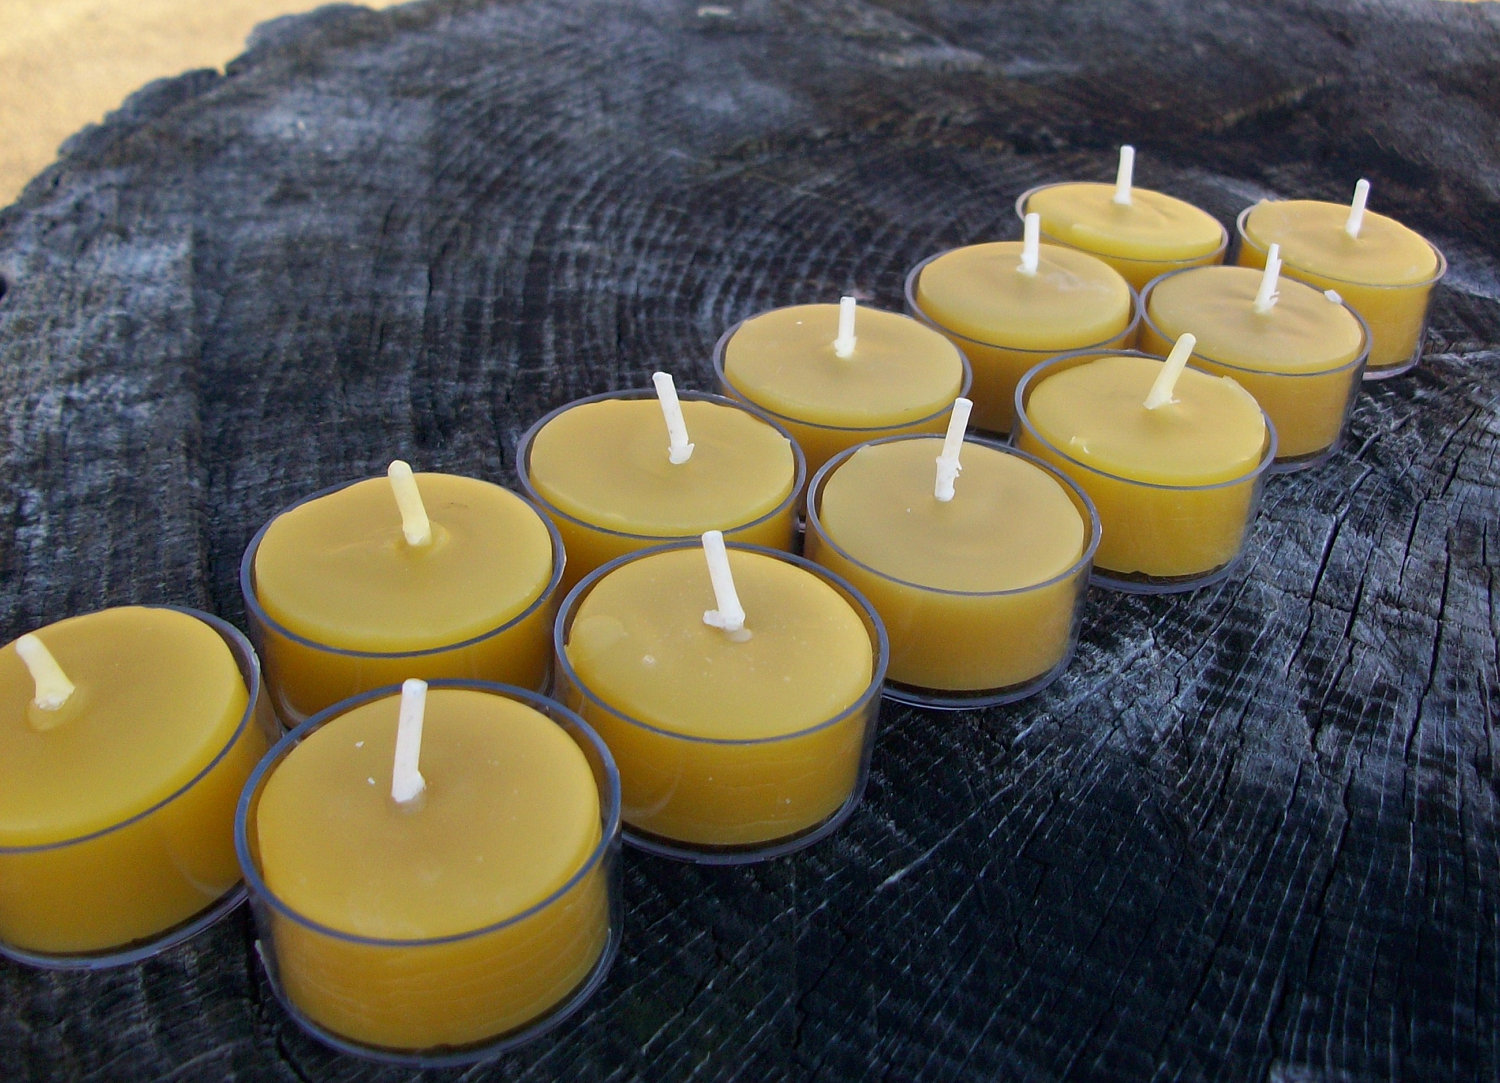 100% Pure English Beeswax Tealights  Candles Rustic D\u00e9cor AutumnWinter Table D\u00e9cor Christmas Gifts Hand Rolled Candles